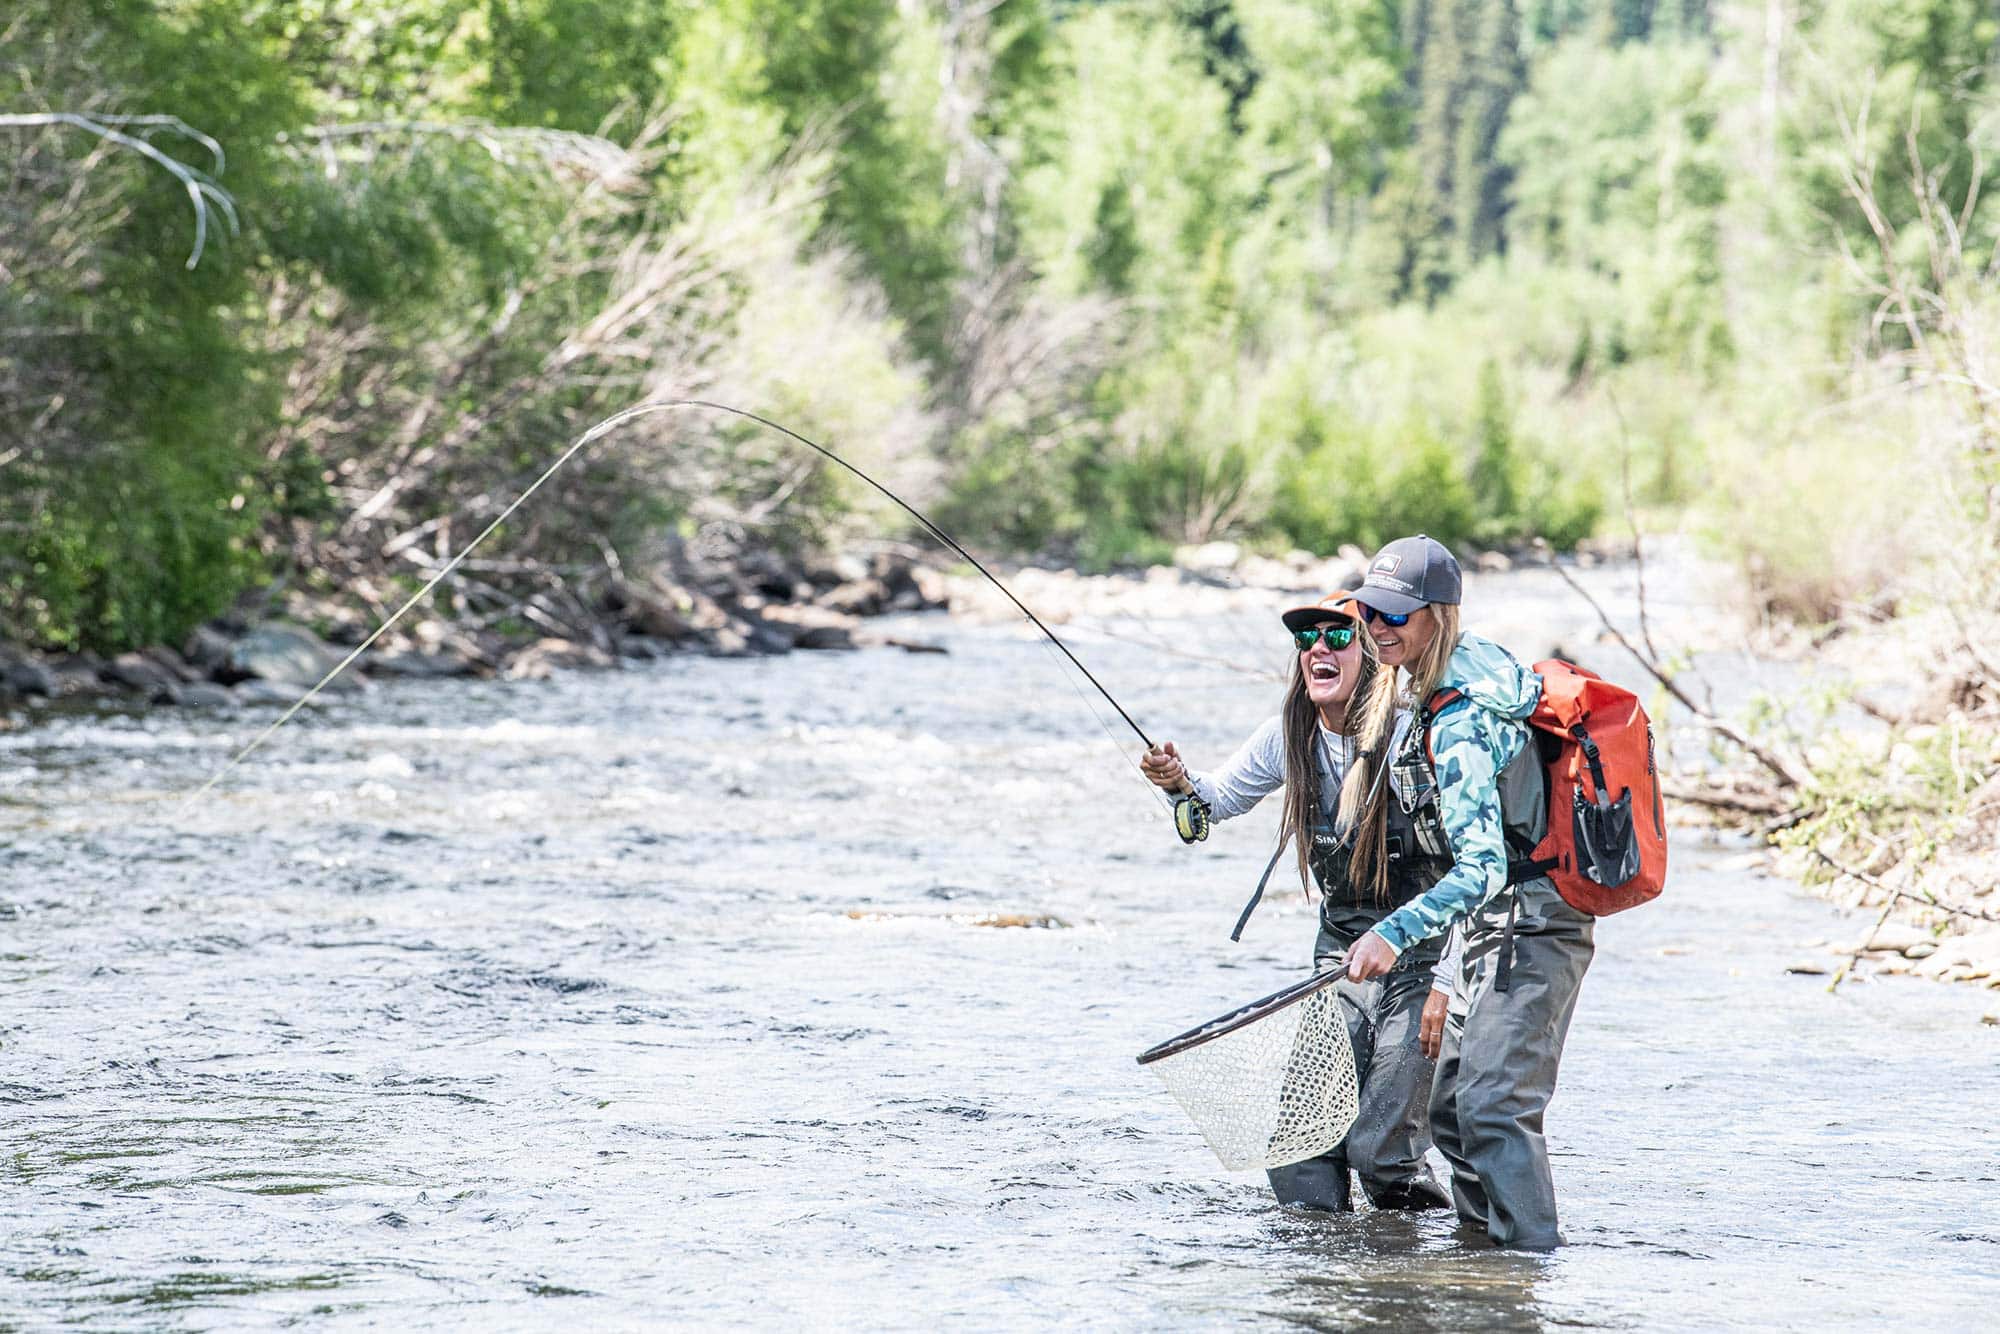 Guided Fly Fishing services in Telluride, CO - Telluride Outside